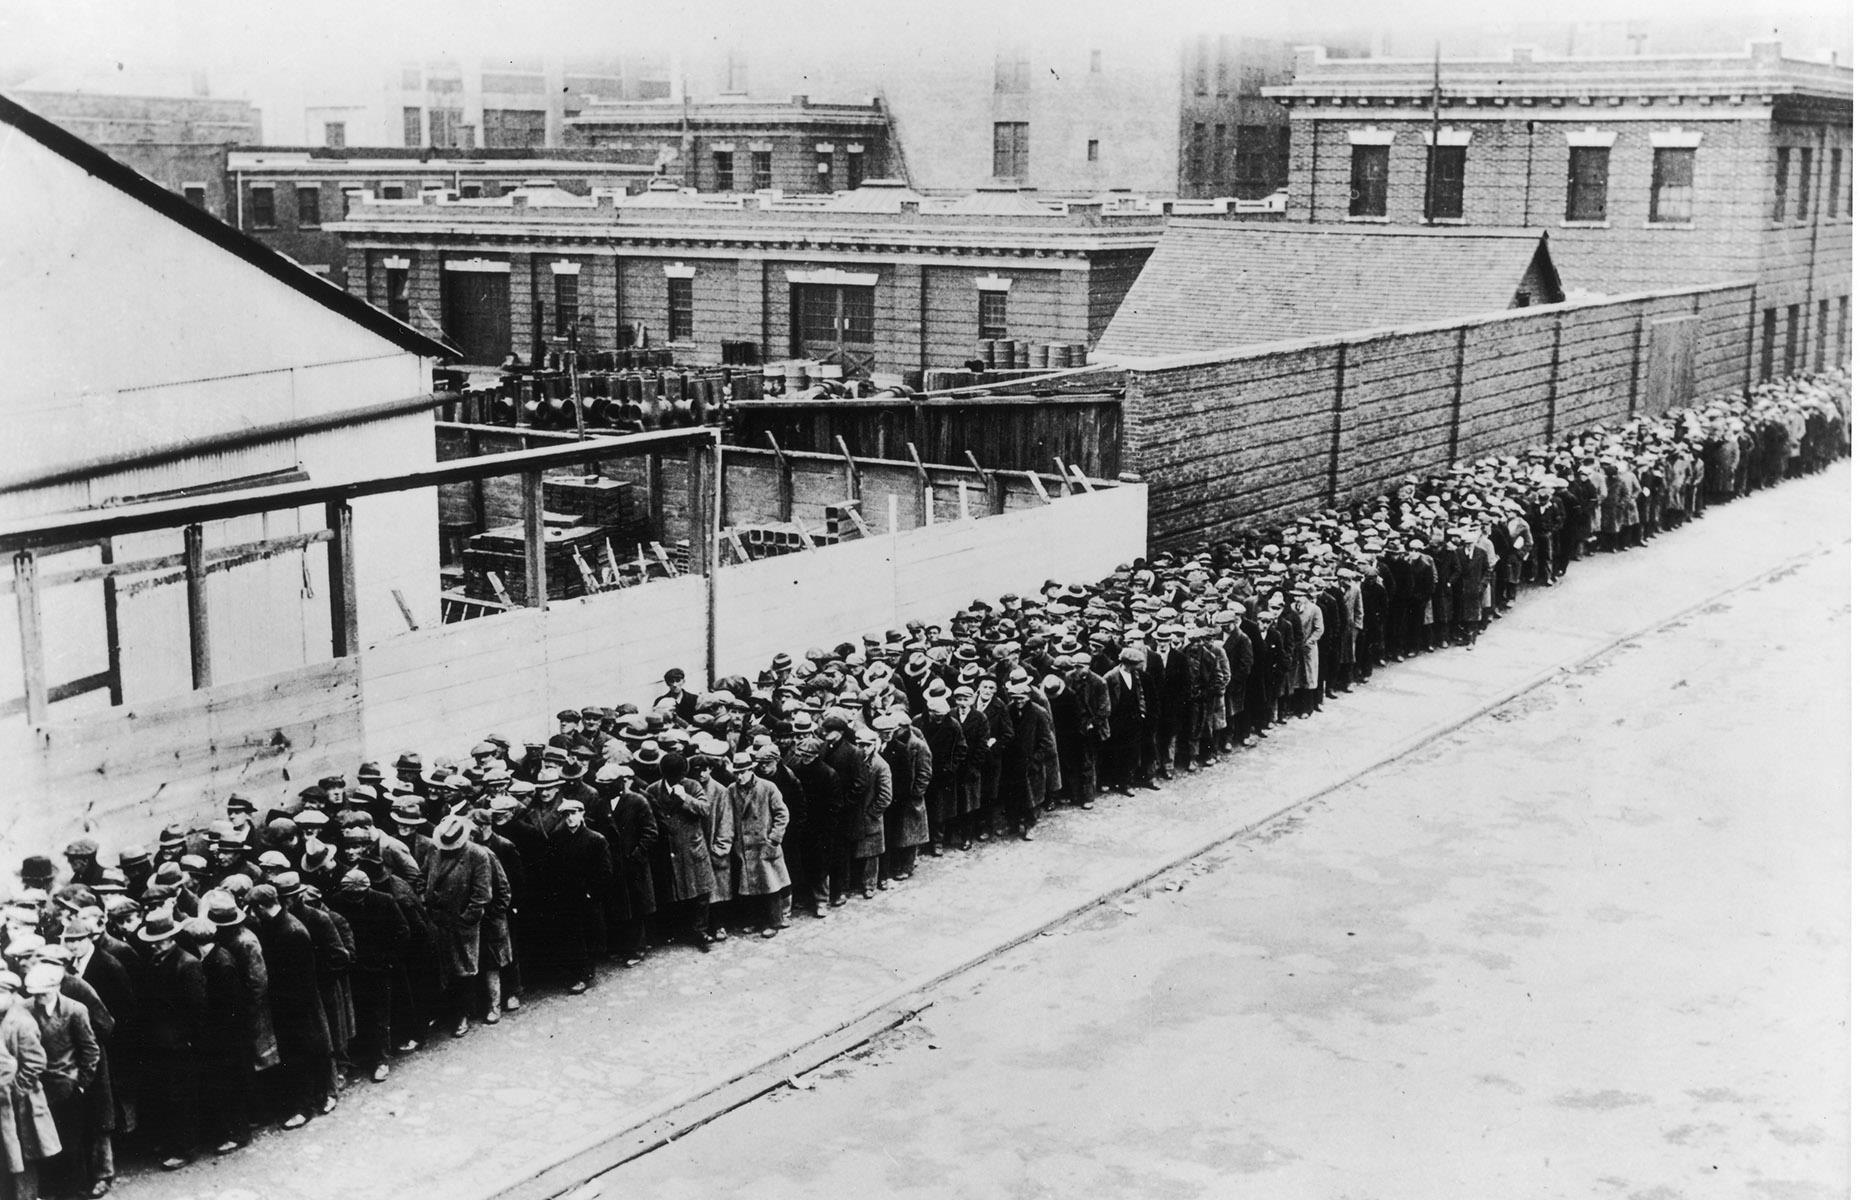 <p>As workers tumbled into poverty thanks to rapidly rising unemployment and, in some cases, the total loss of their savings, they were forced to rely on the state for help. Local government initiatives to feed and shelter those in need were overwhelmed by crowds of people, like this long queue of men patiently waiting for a free dinner at a municipal boarding house in New York.</p>